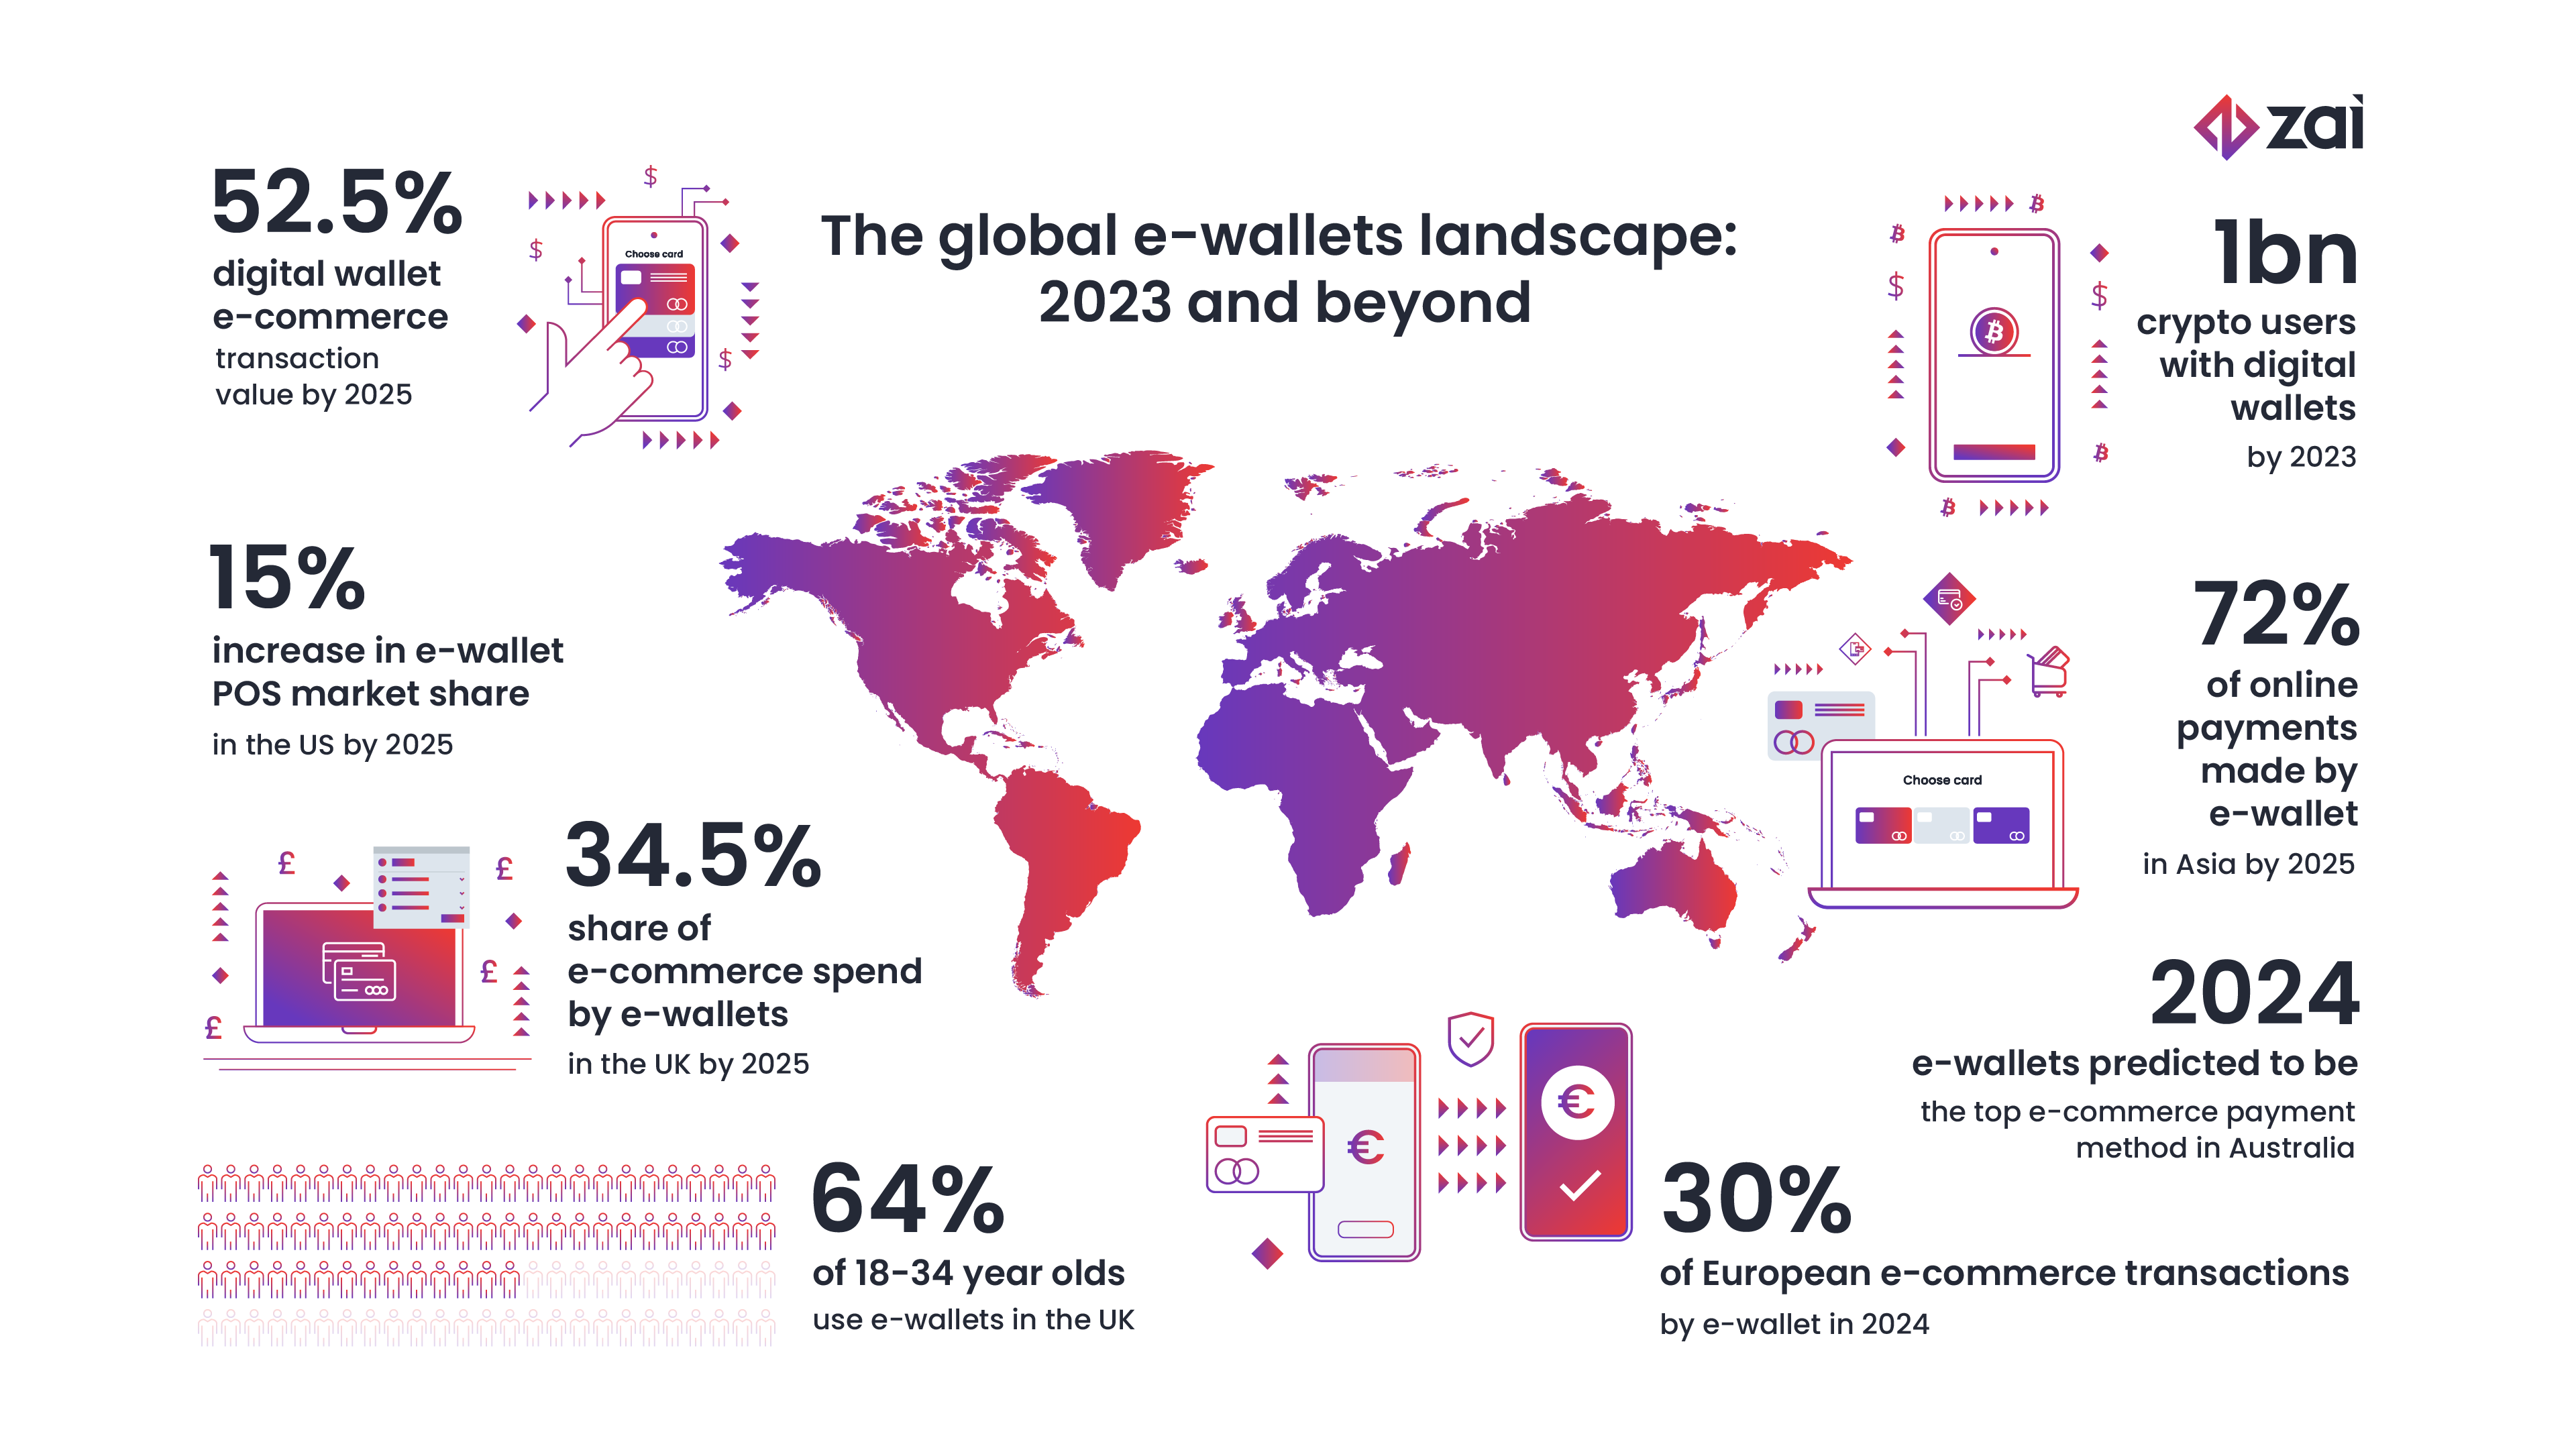 The global e-wallets landscape: 2023 and beyond